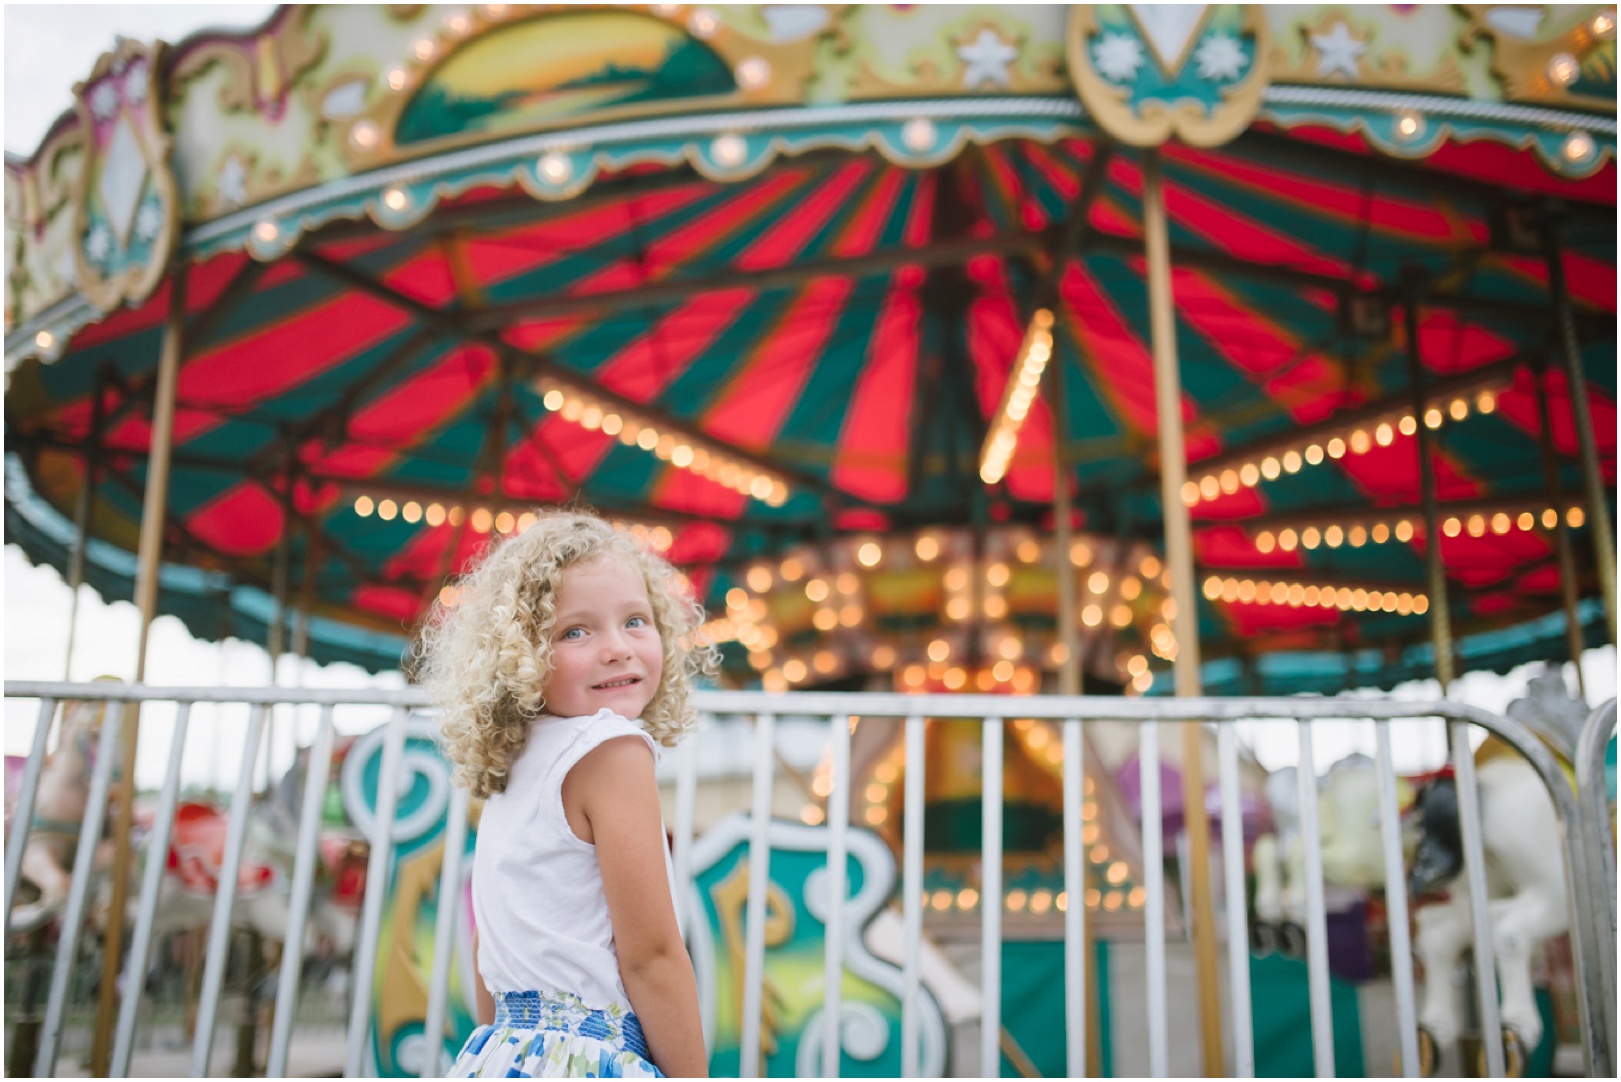 Maddie at the Fair - Showit Blog